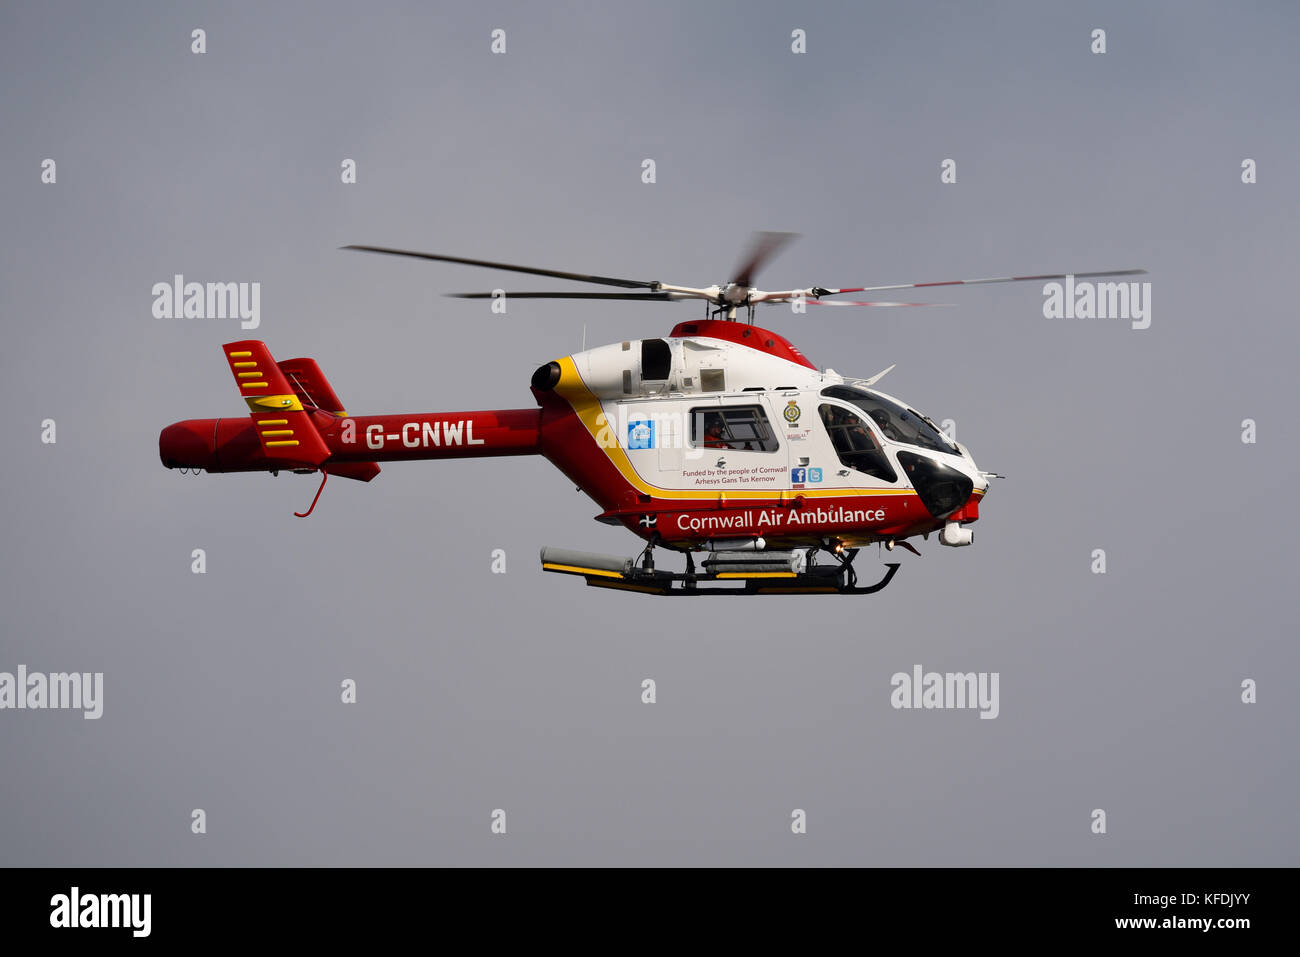 Cornwall Air Ambulance helicopter G-CNWL MD 902 Explorer over Cornwall Airport Stock Photo